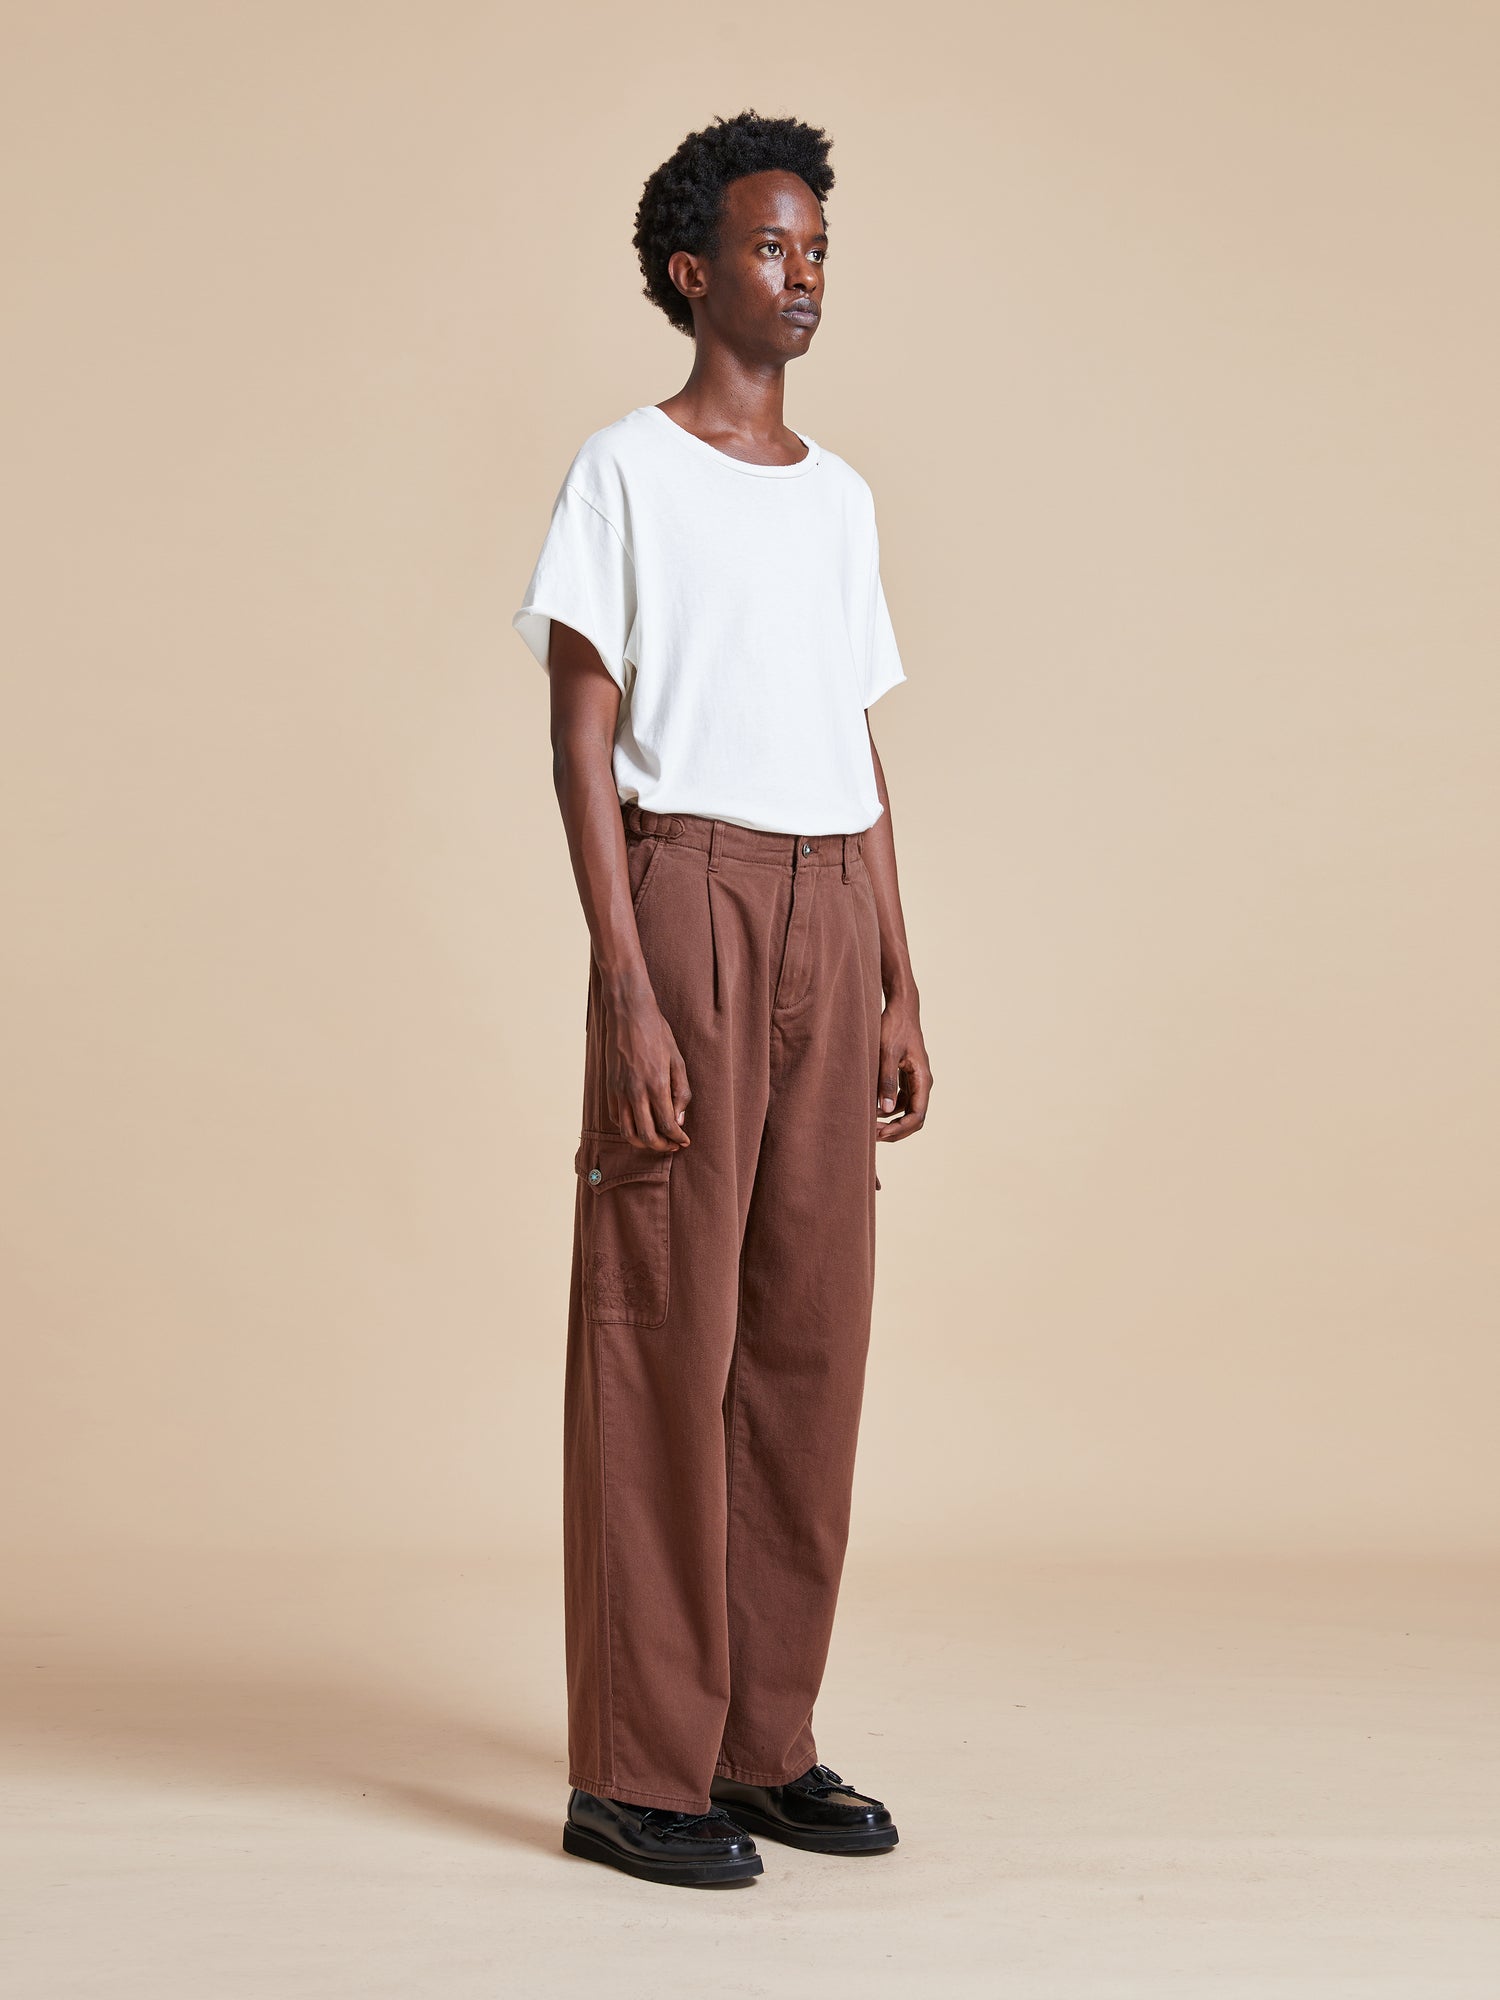 The model is wearing a white t-shirt and Dusky Western Cargo Jeans.